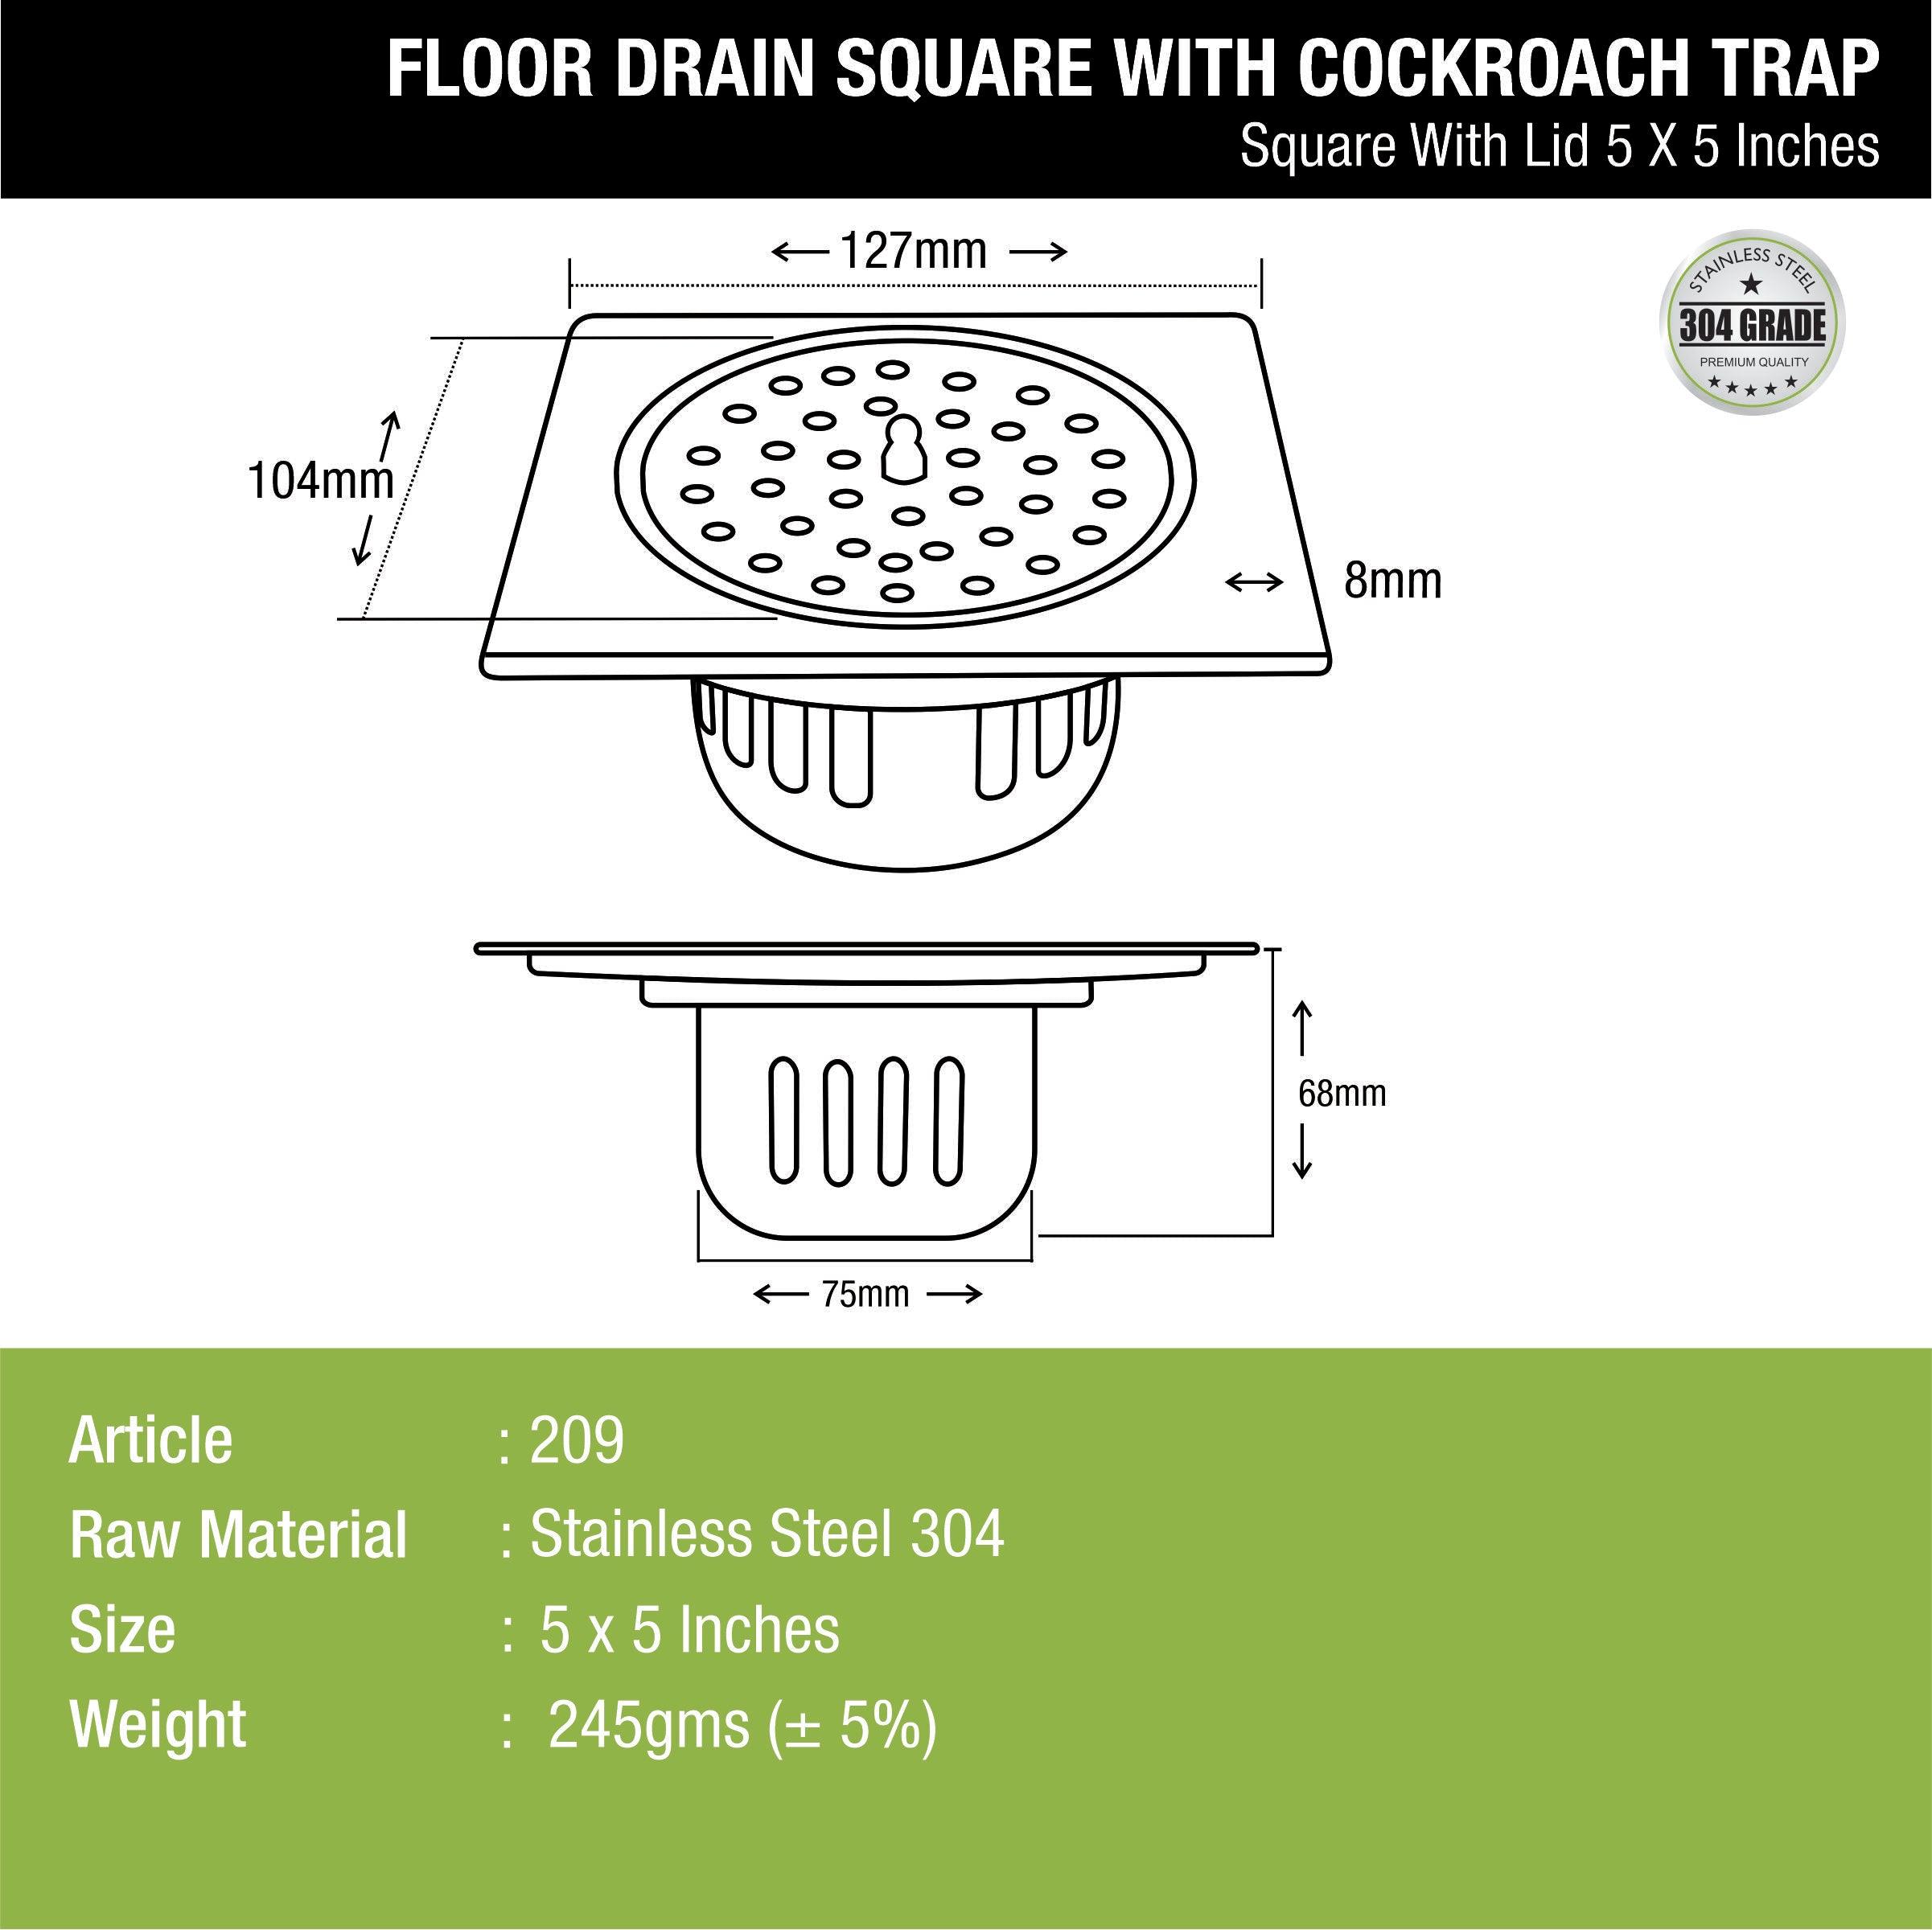 Square Floor Drain (5 x 5 Inches) with Lid and Cockroach Trap - LIPKA - Lipka Home